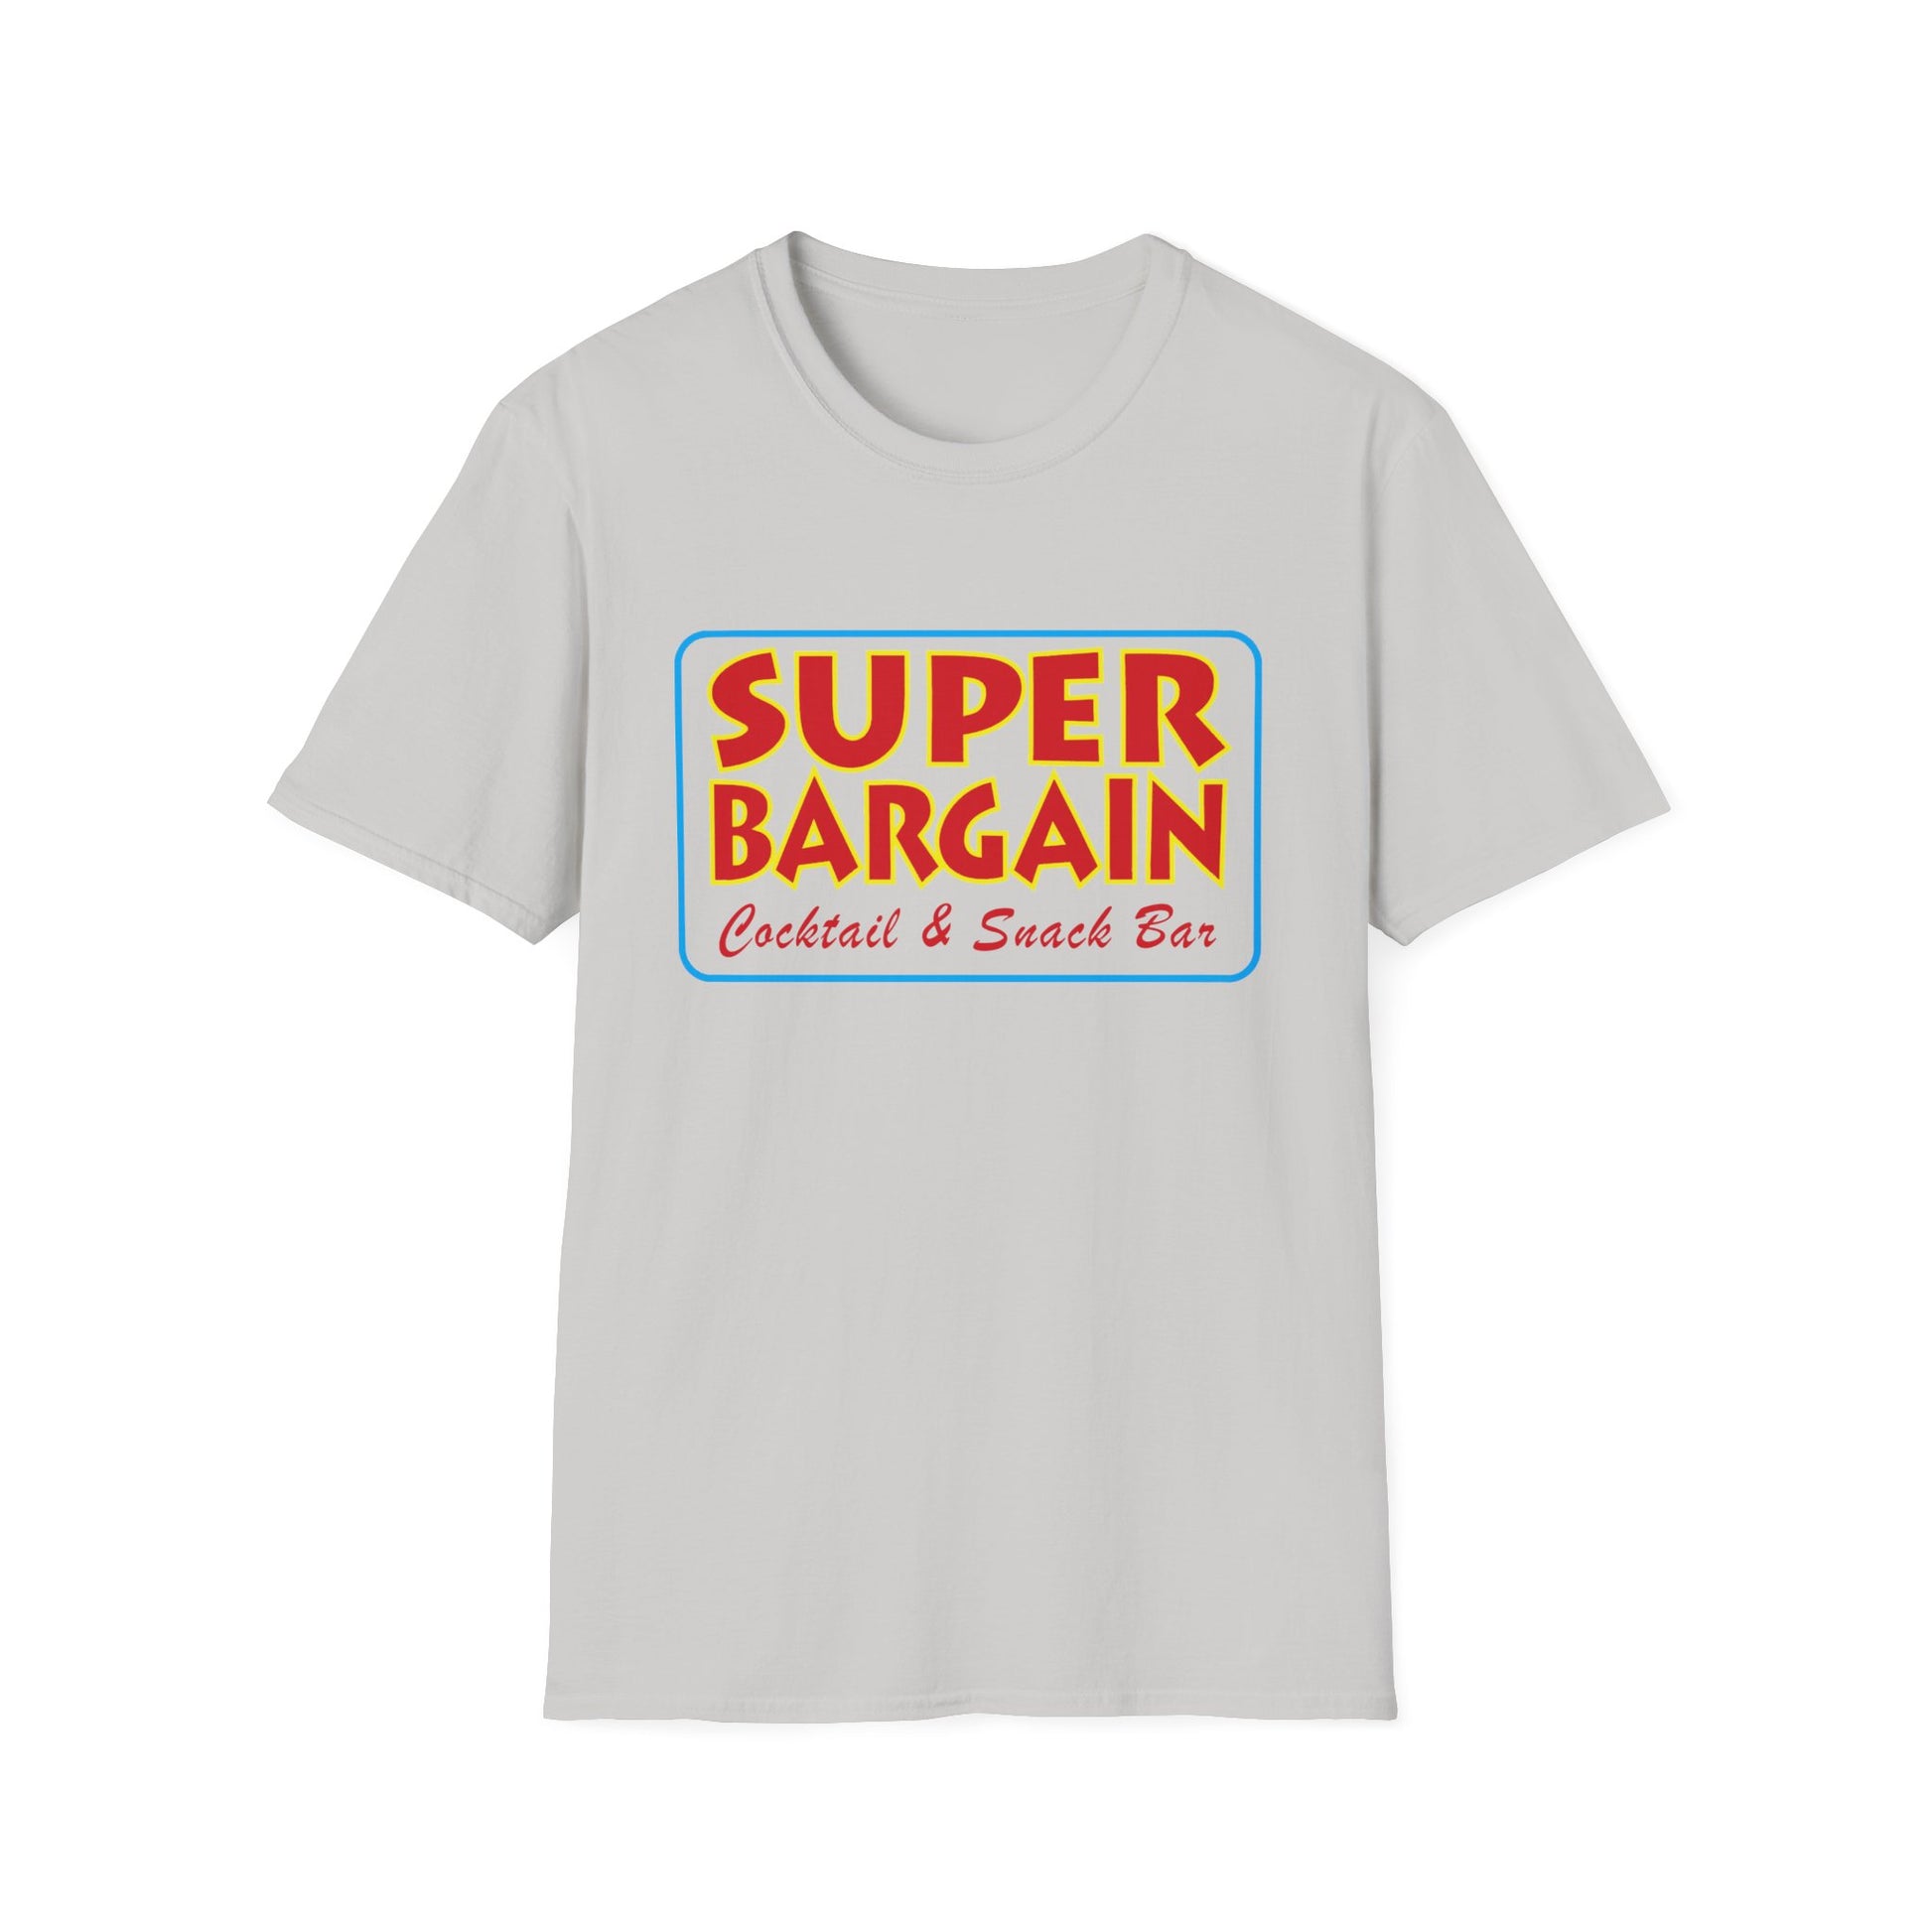 A Printify Unisex Softstyle Logo T-Shirt with a colorful graphic on the front reading "SUPER BARGAIN Cocktail & Snack Bar - Cabbagetown, Toronto" in red and blue fonts inside a yellow rectangle.